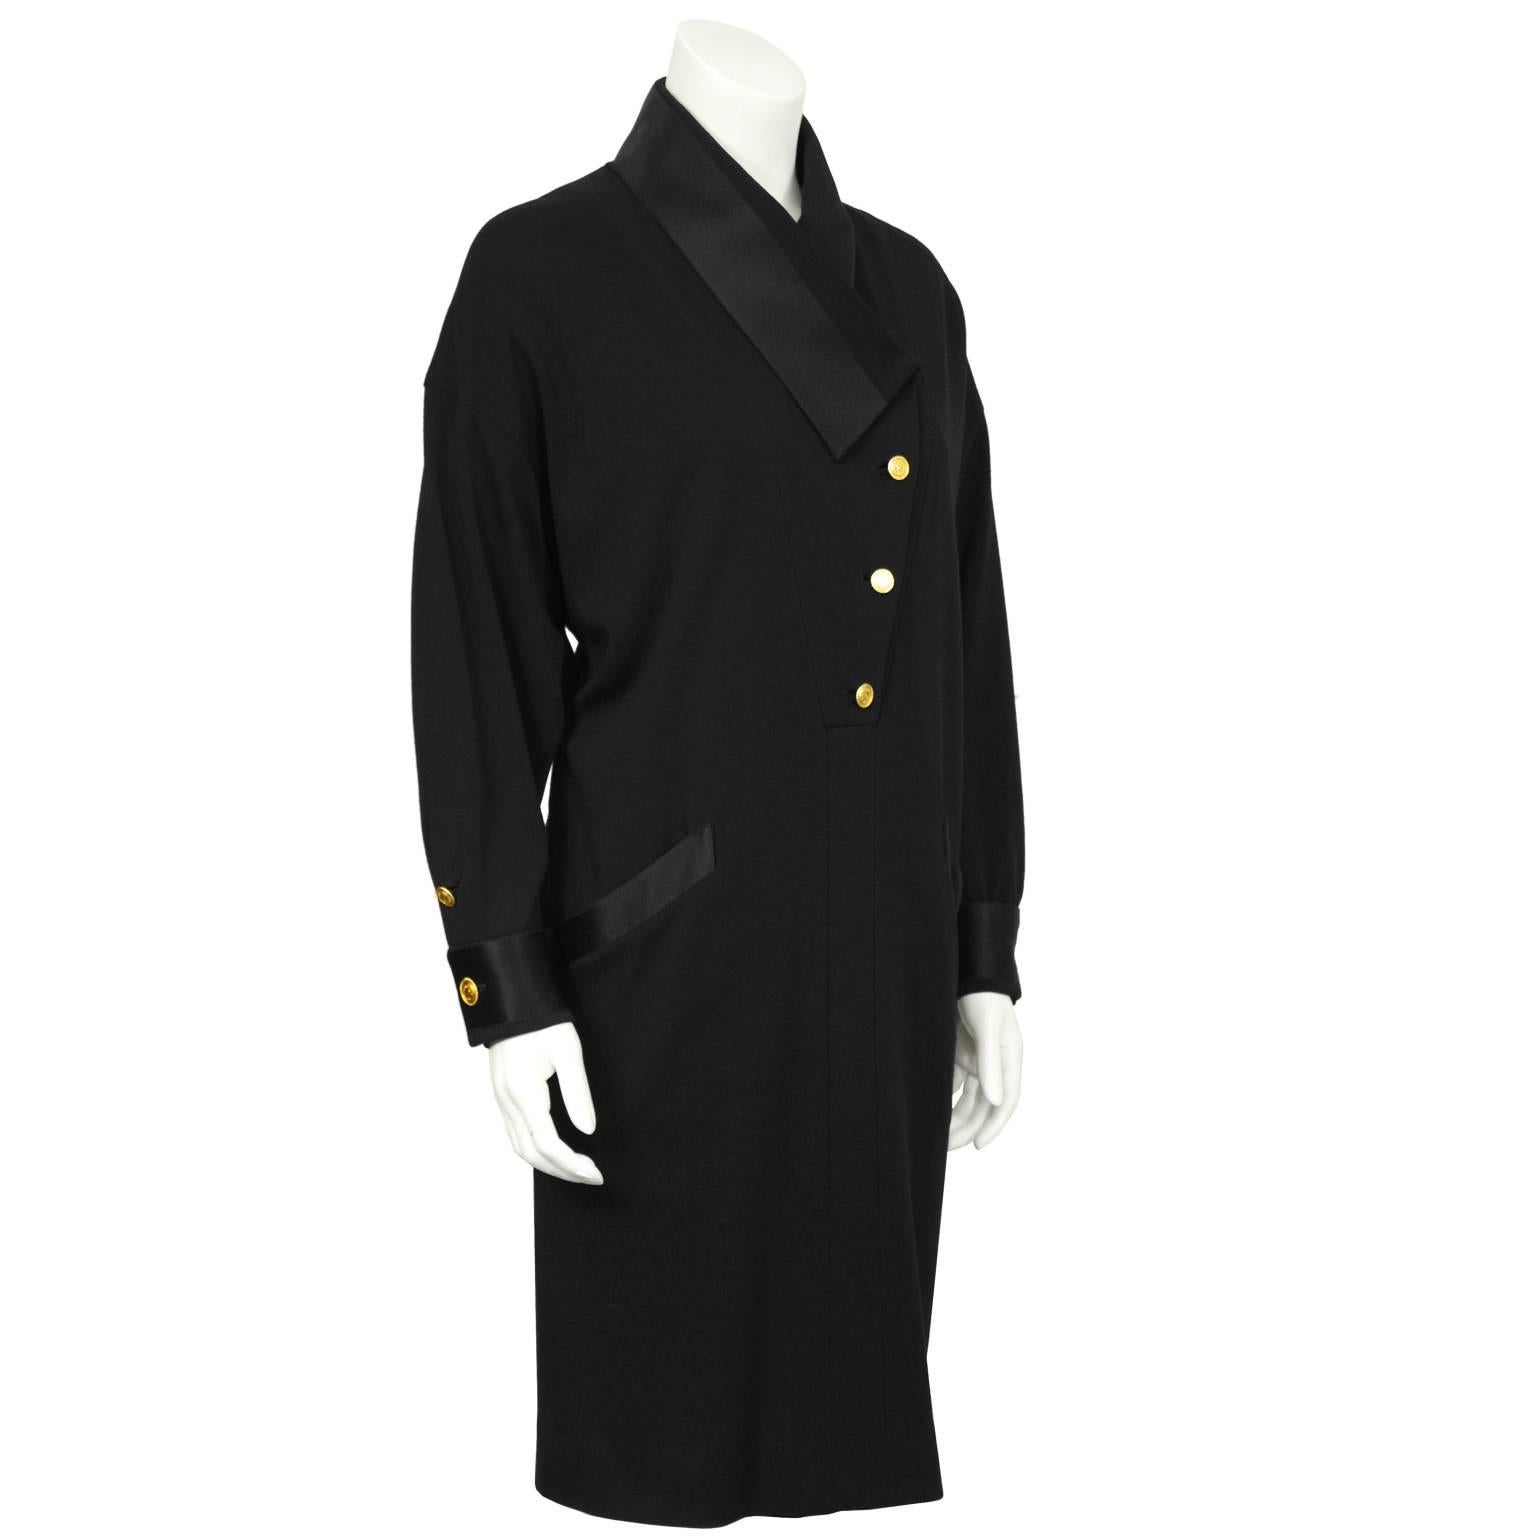 Unique style dress features an asymmetrical collar finished with gold buttons stamped with “Coco Chanel France” surrounding Coco’s profile. The dress features diagonal pockets on the front trimmed in black satin and the cuffs have matching gold